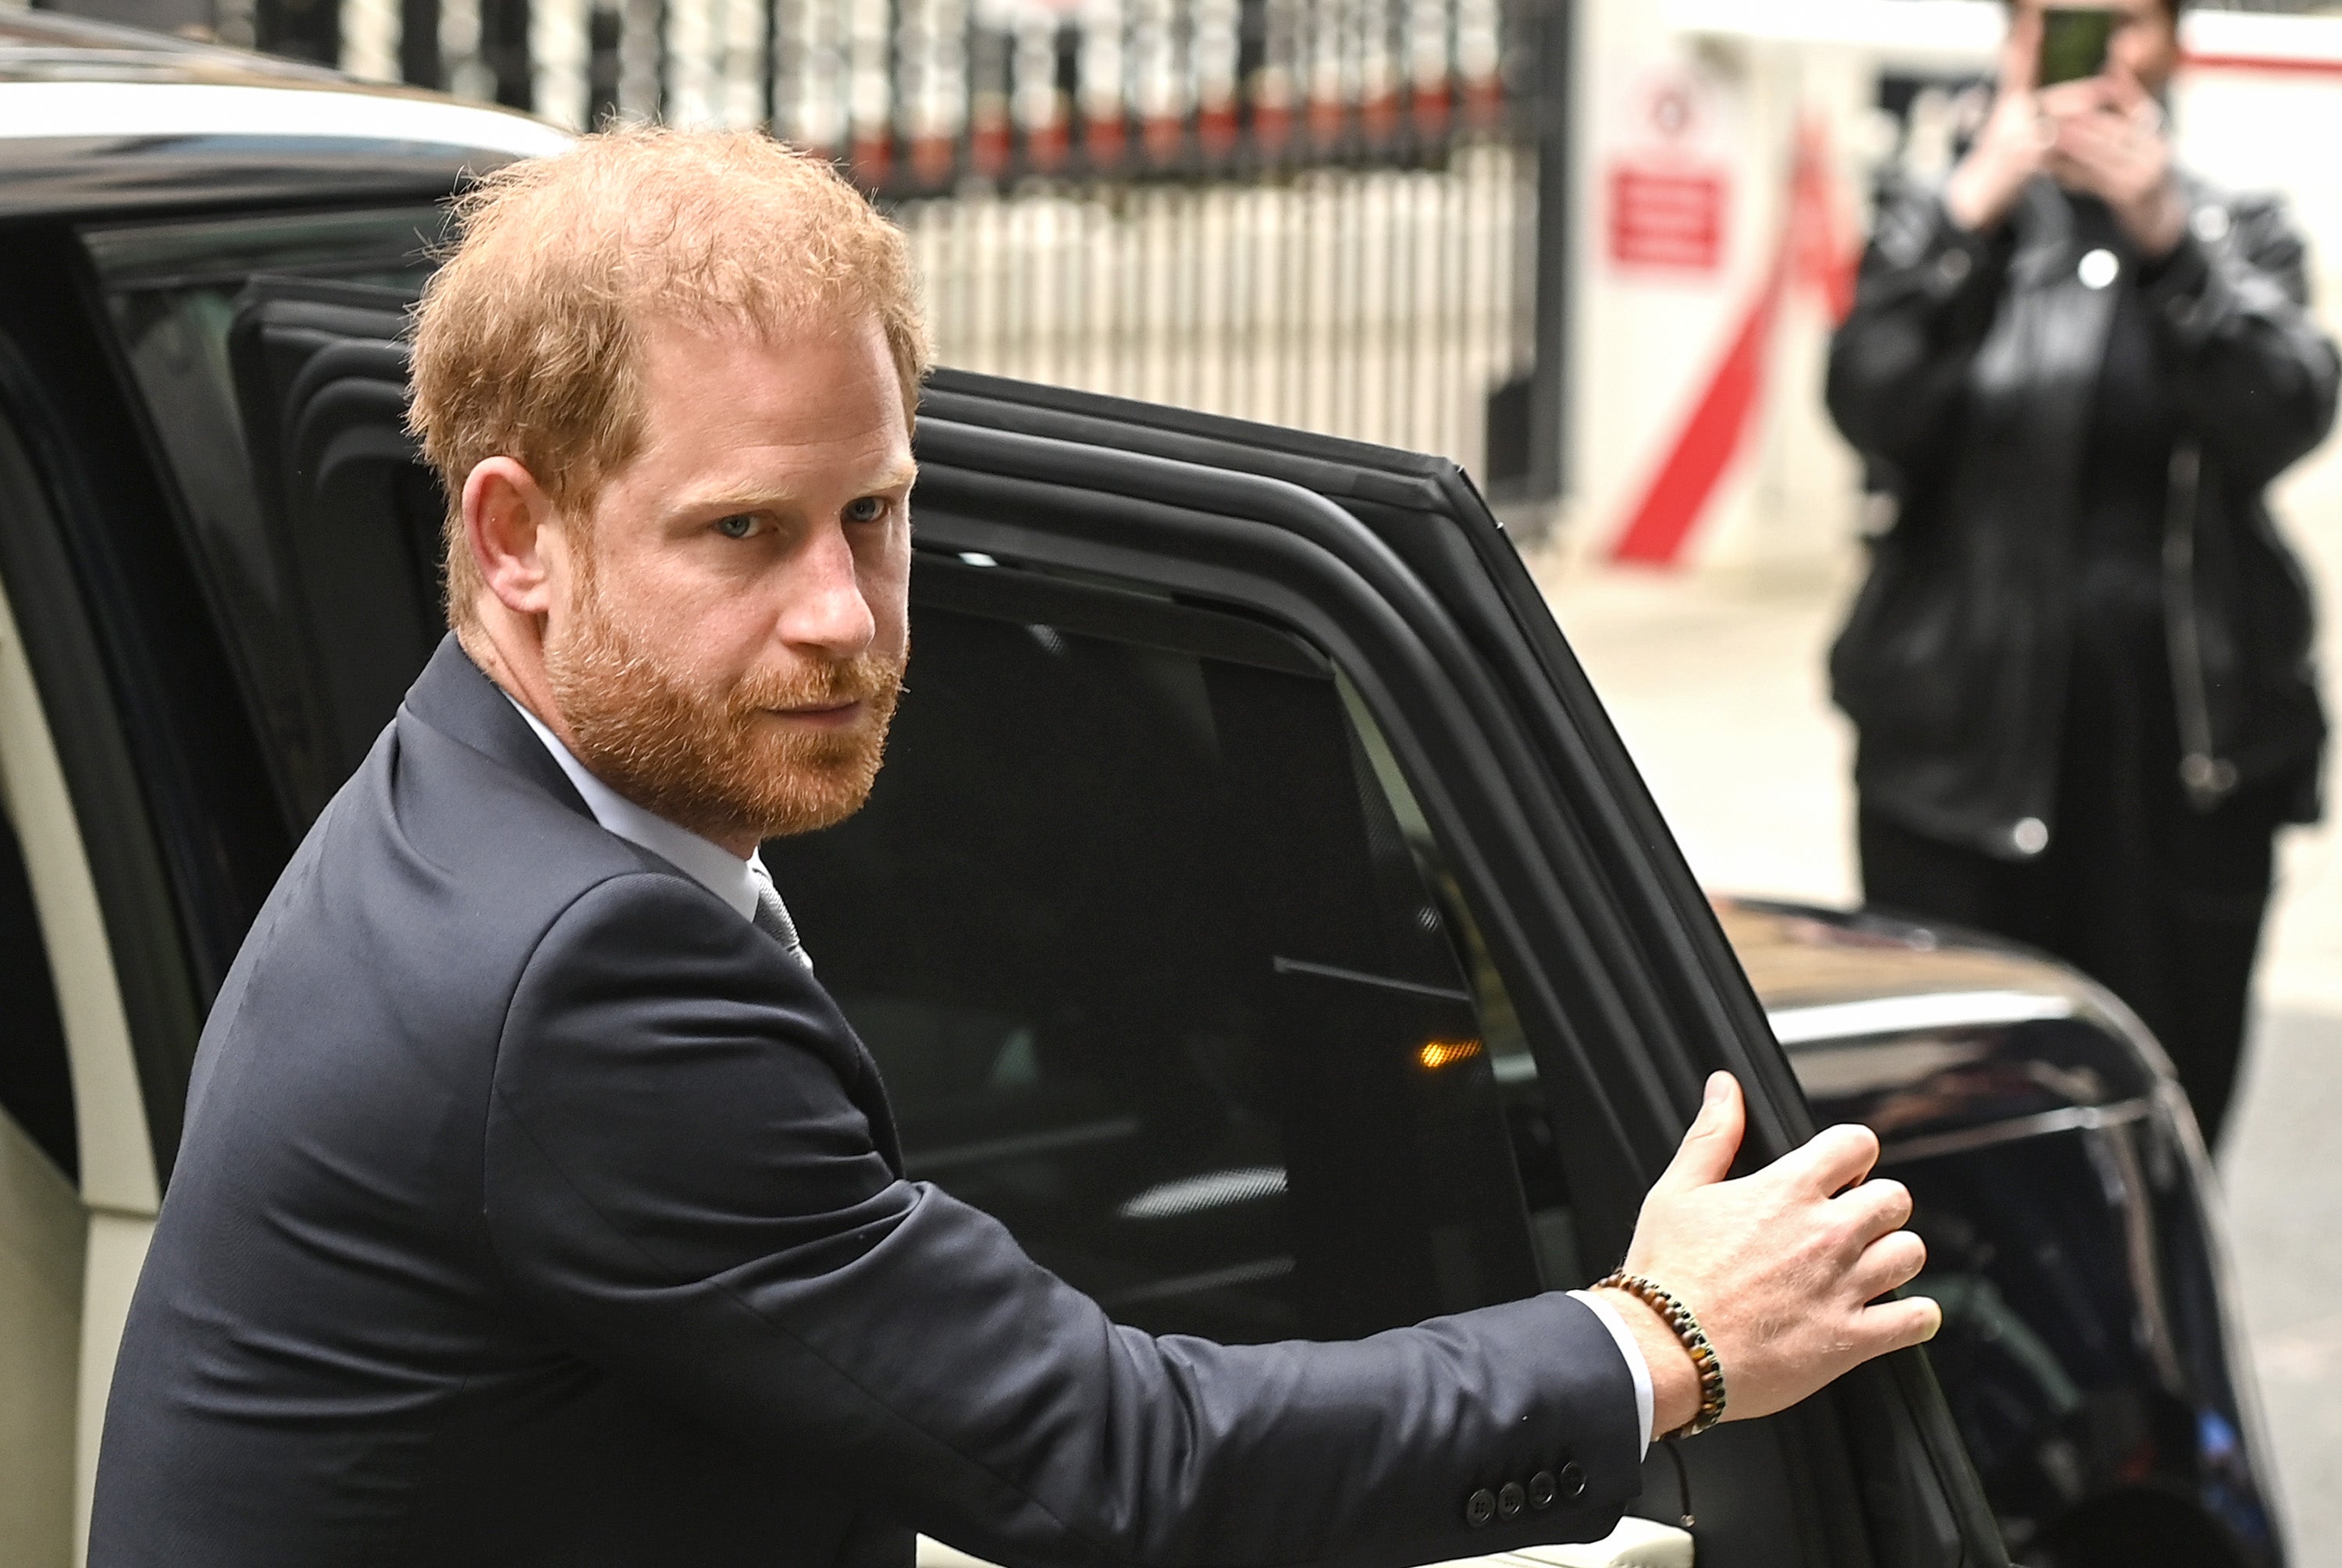 Prince Harry arrives for day two of Mirror Group phone hacking trial in London